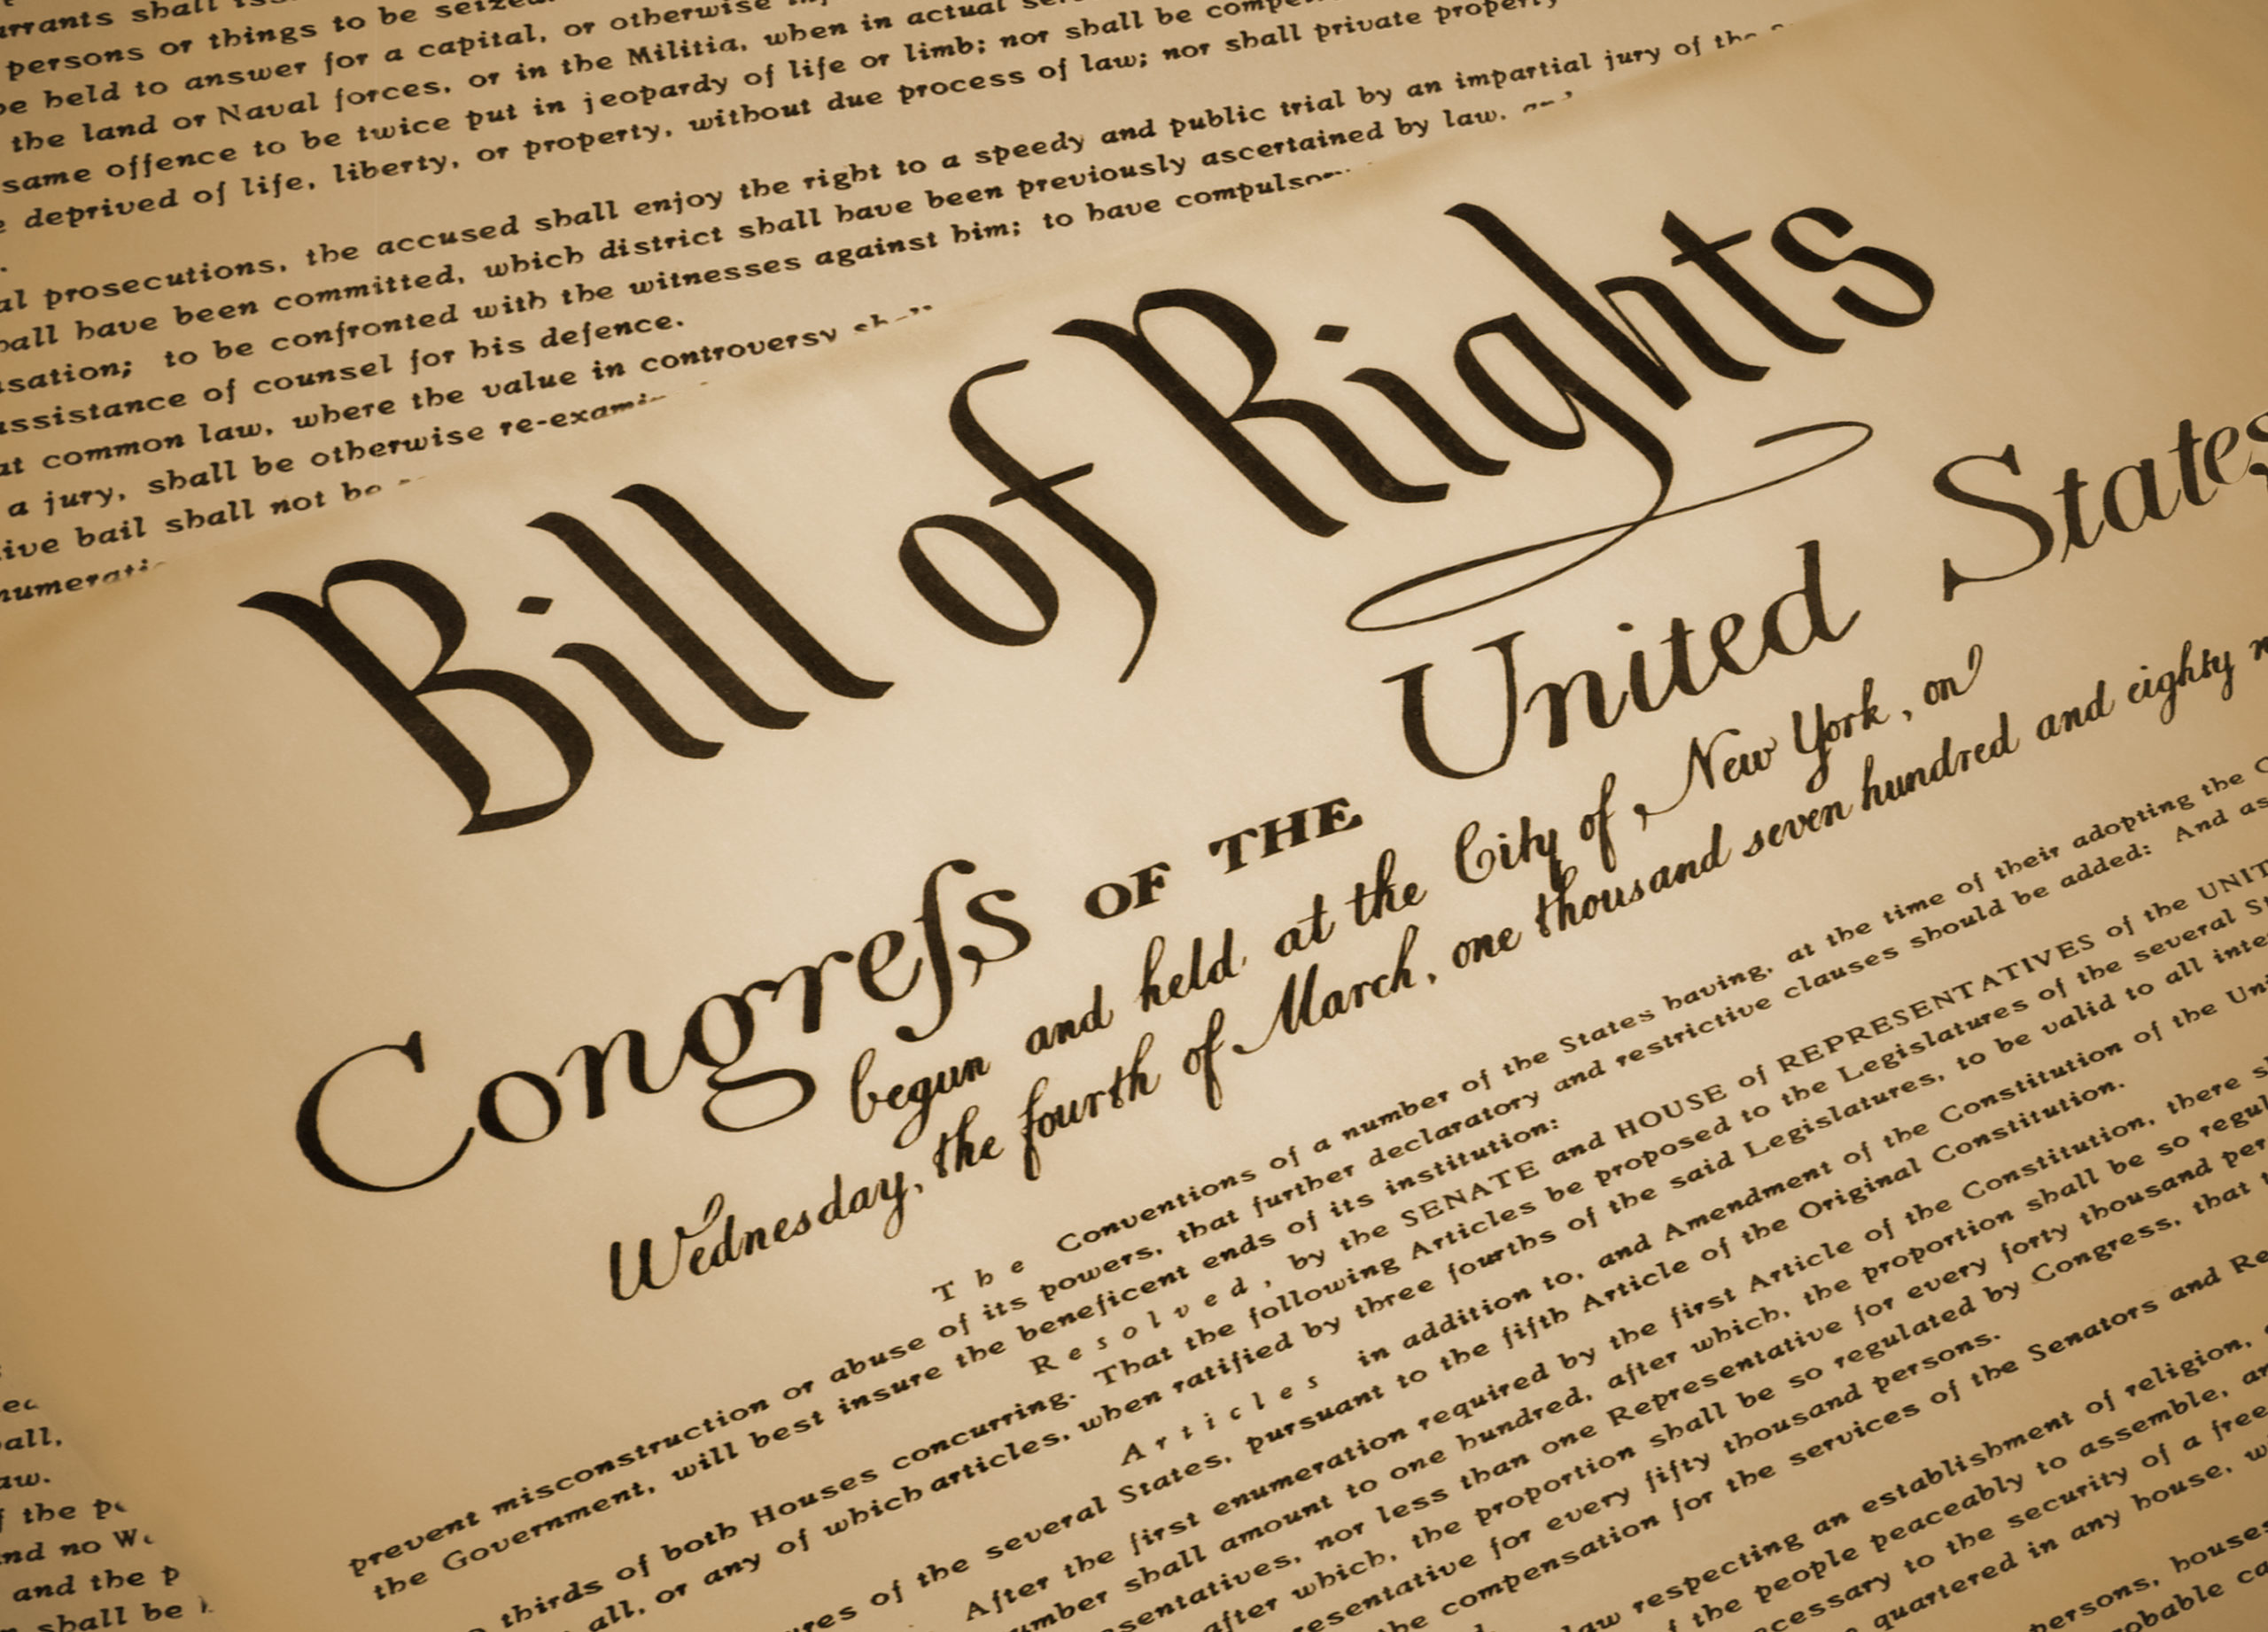 Why Should We Care About the Ninth Amendment?